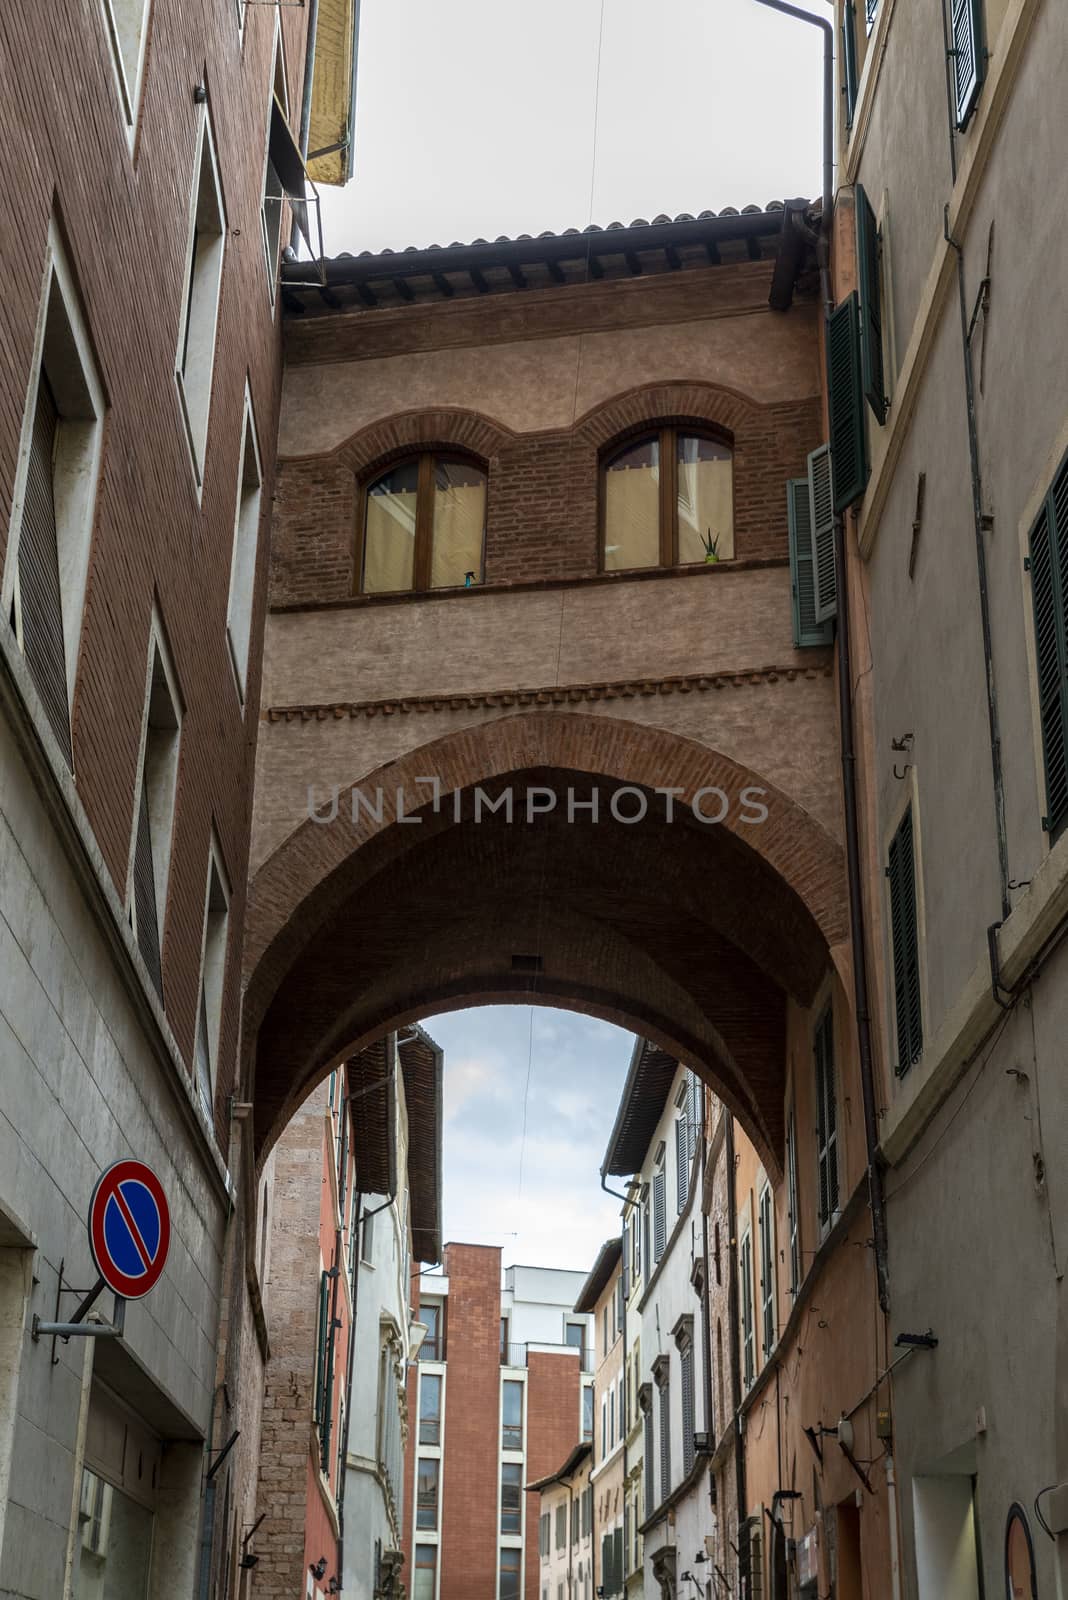 architecture of the streets of the city of foligno by carfedeph